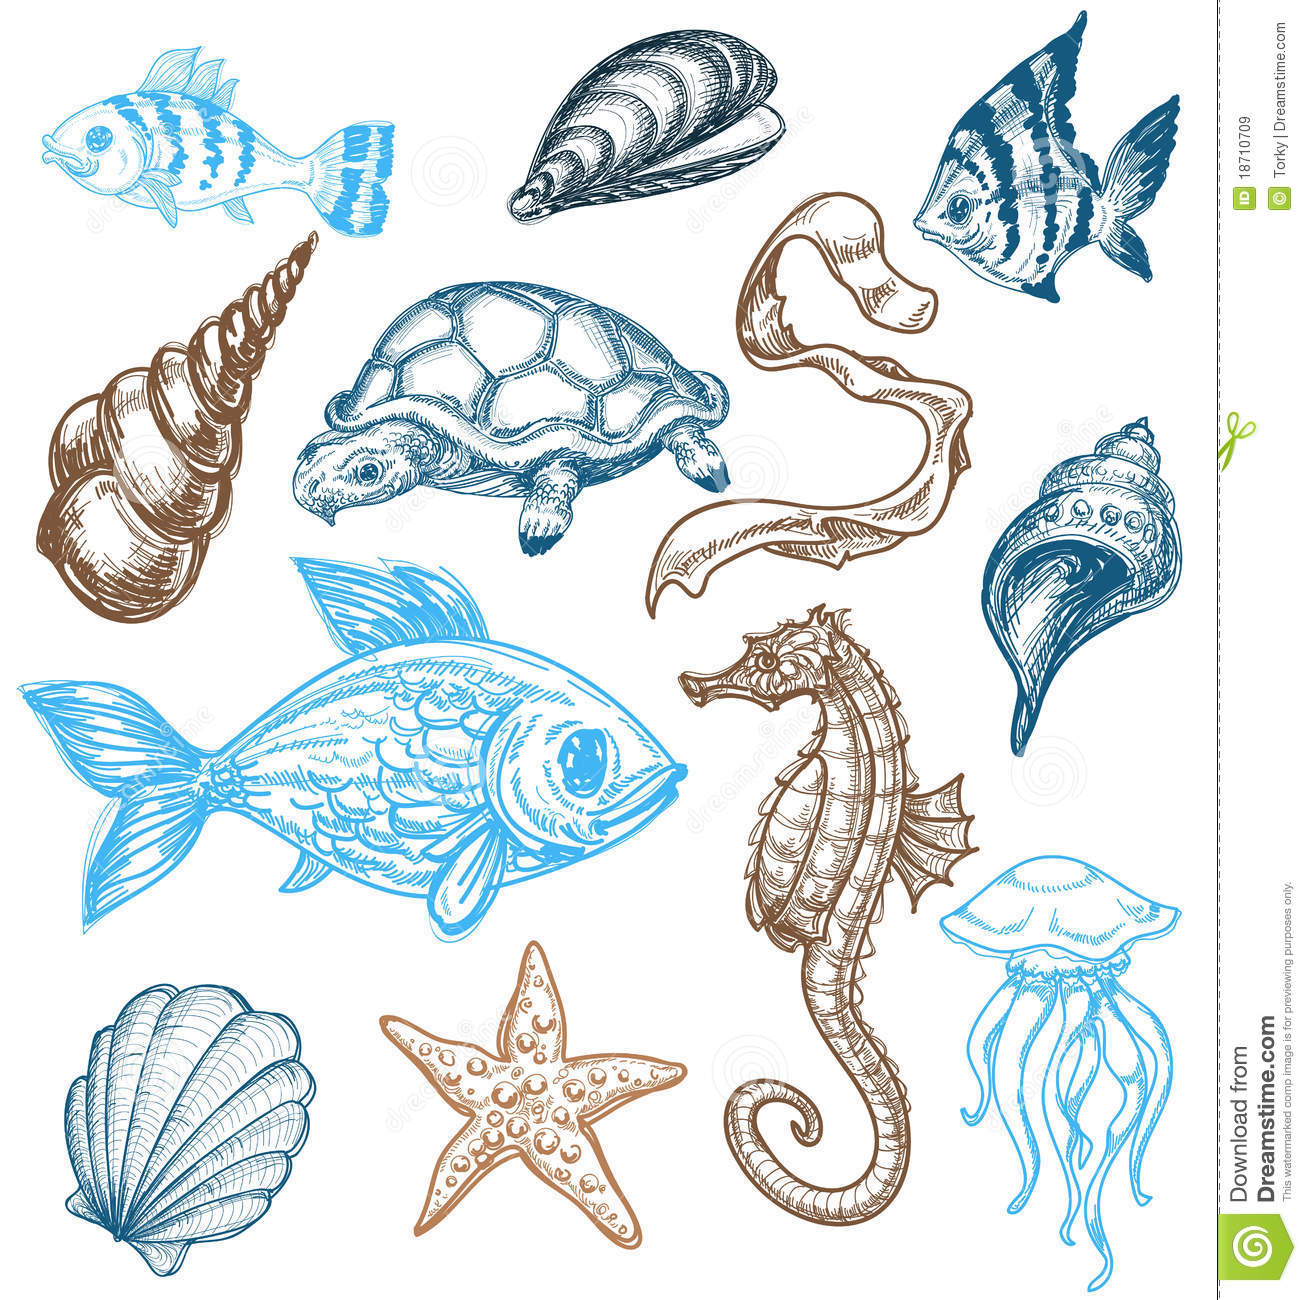 Royalty Free Stock Images  Marine Life Collection